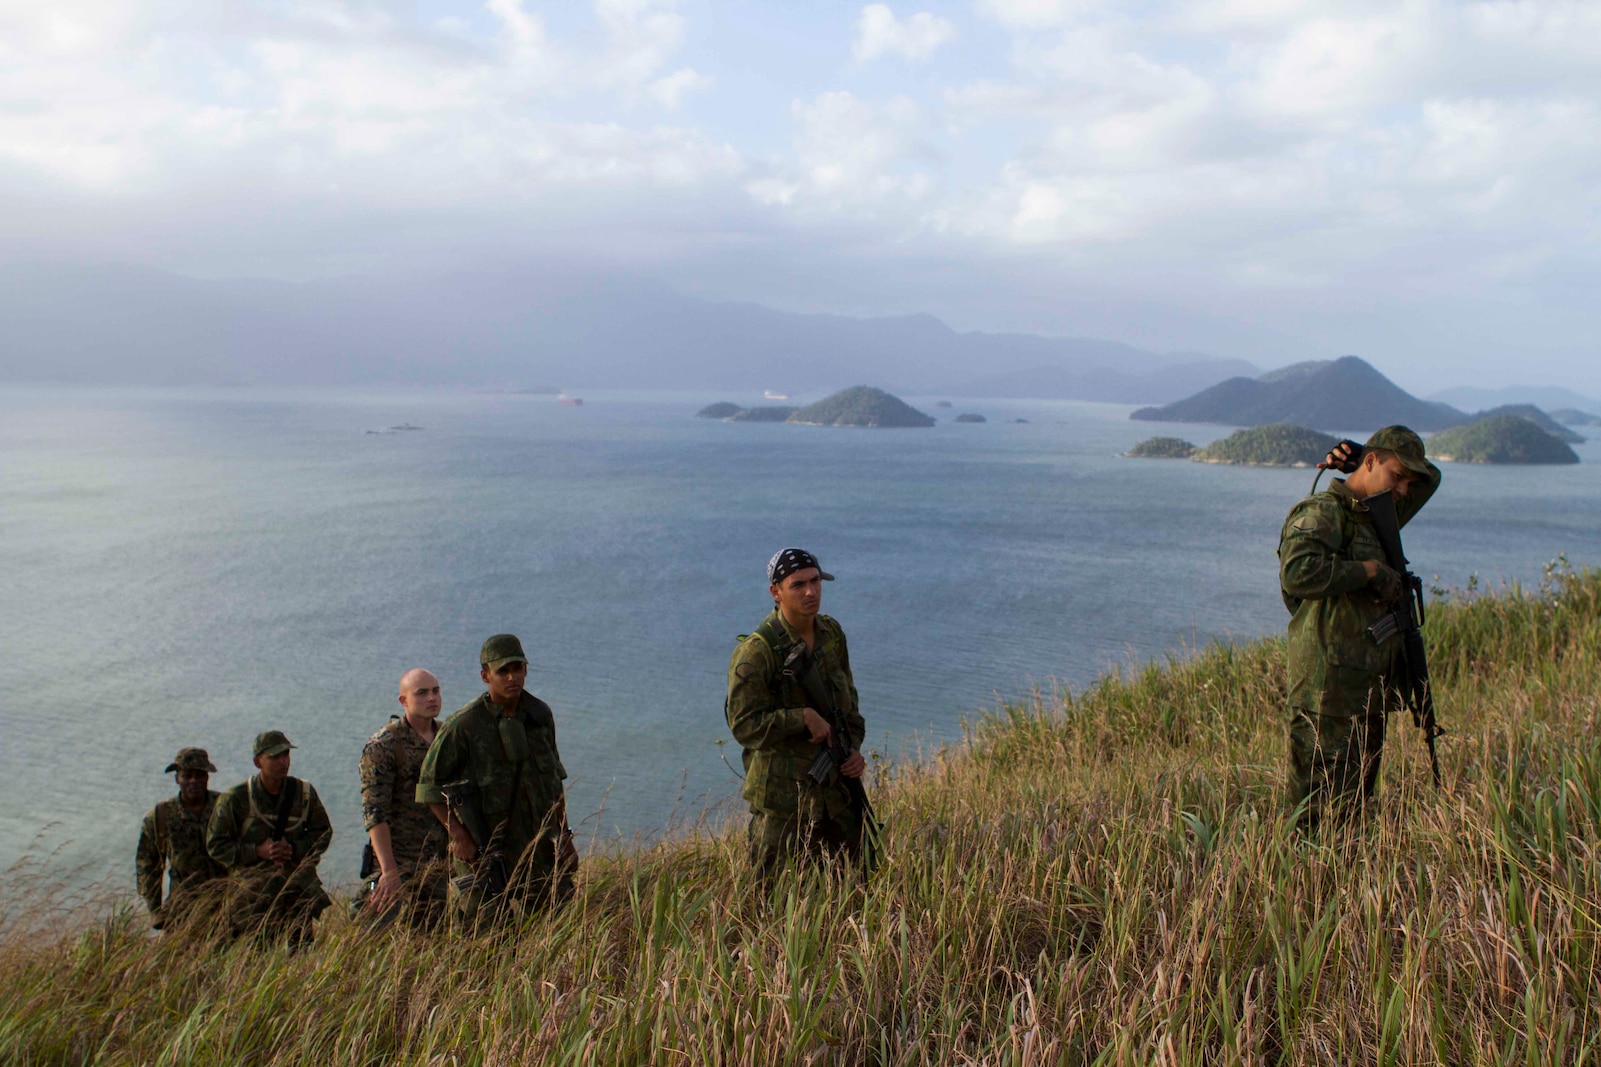 Brazilian Marines track a simulated enemy up a mountain during a bi-lateral combat tracking exchange held on Marambaia Island, Brazil, Aug. 5, 2014. During the exchange, Brazilian and U.S. Marines with Special Purpose Marine Air Ground Task Force South shared their tactics on tracking enemy personnel and how to spot hidden improvised explosive devices. Through close cooperation, the U.S. and its partners are ready to address transnational security challenges through integrated and coordinated approaches. SPMAGTF-South is currently embarked aboard the future amphibious assault ship USS America (LHA 6) in support of her maiden transit, "America visits the Americas." (U.S. Marine Corps Photo by Cpl. Donald Holbert/ Released)